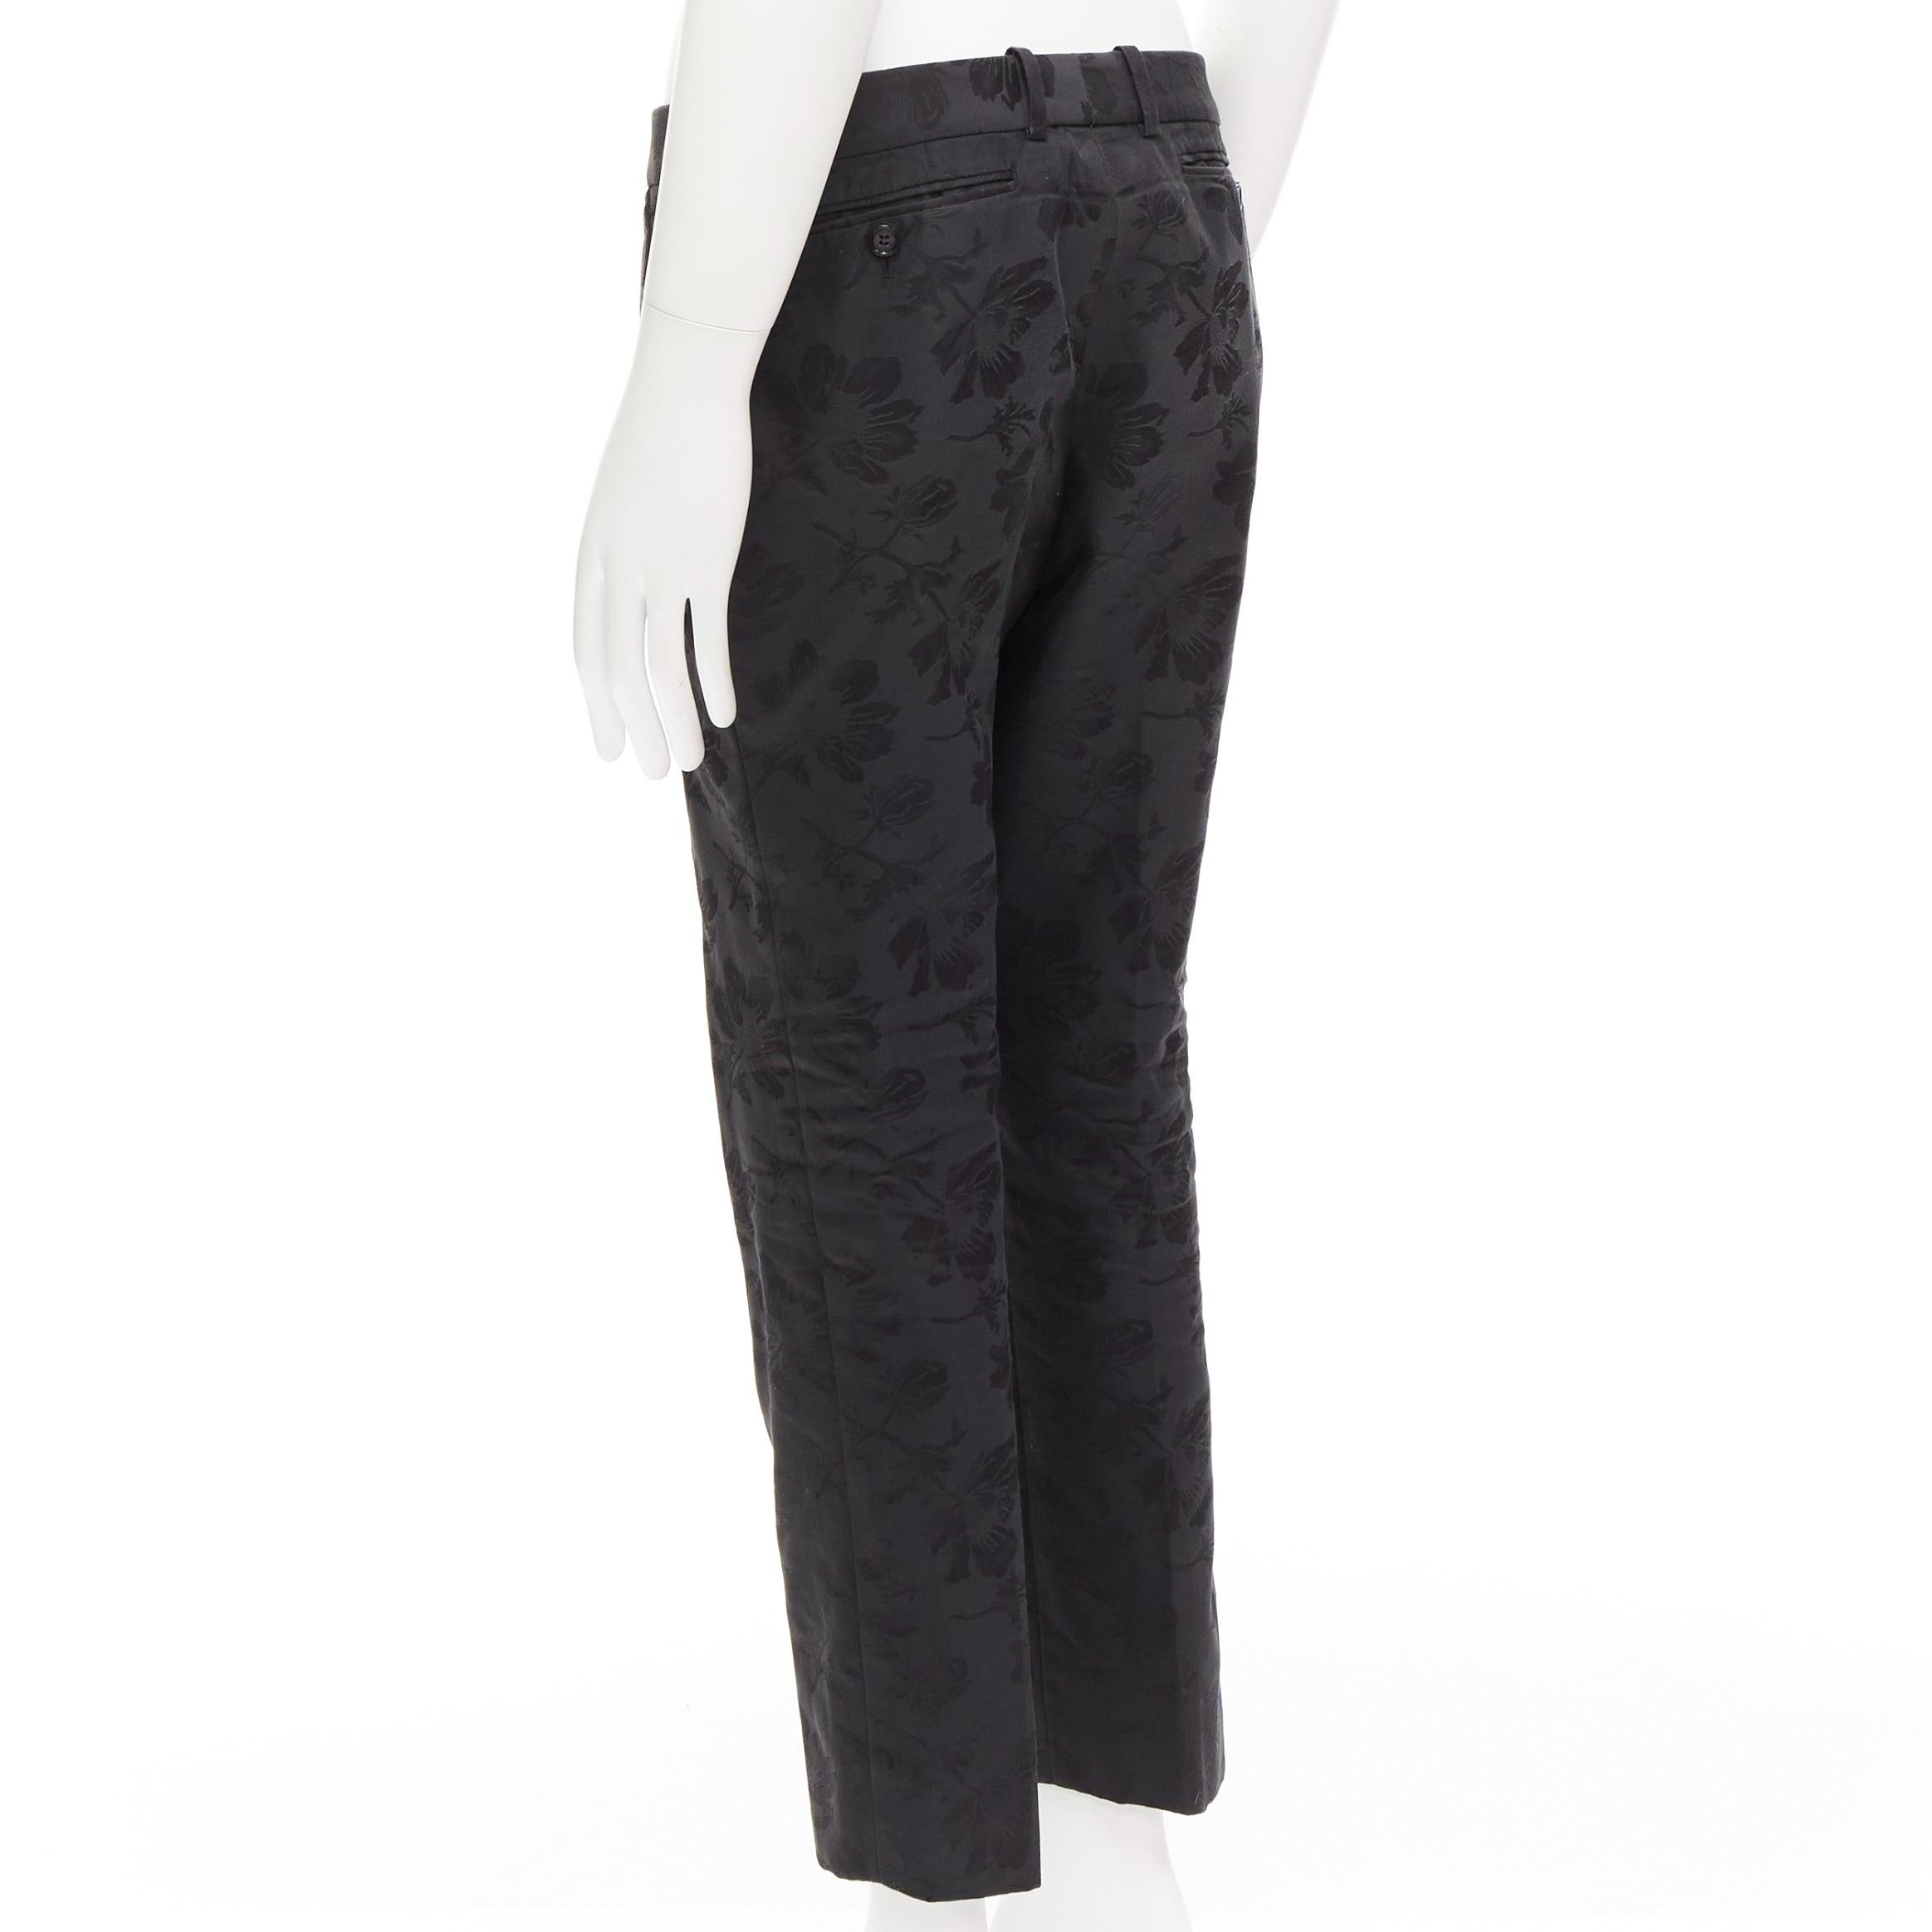 ALEXANDER MCQUEEN 2015 black floral jacquard tapered dress pants IT46 S 1